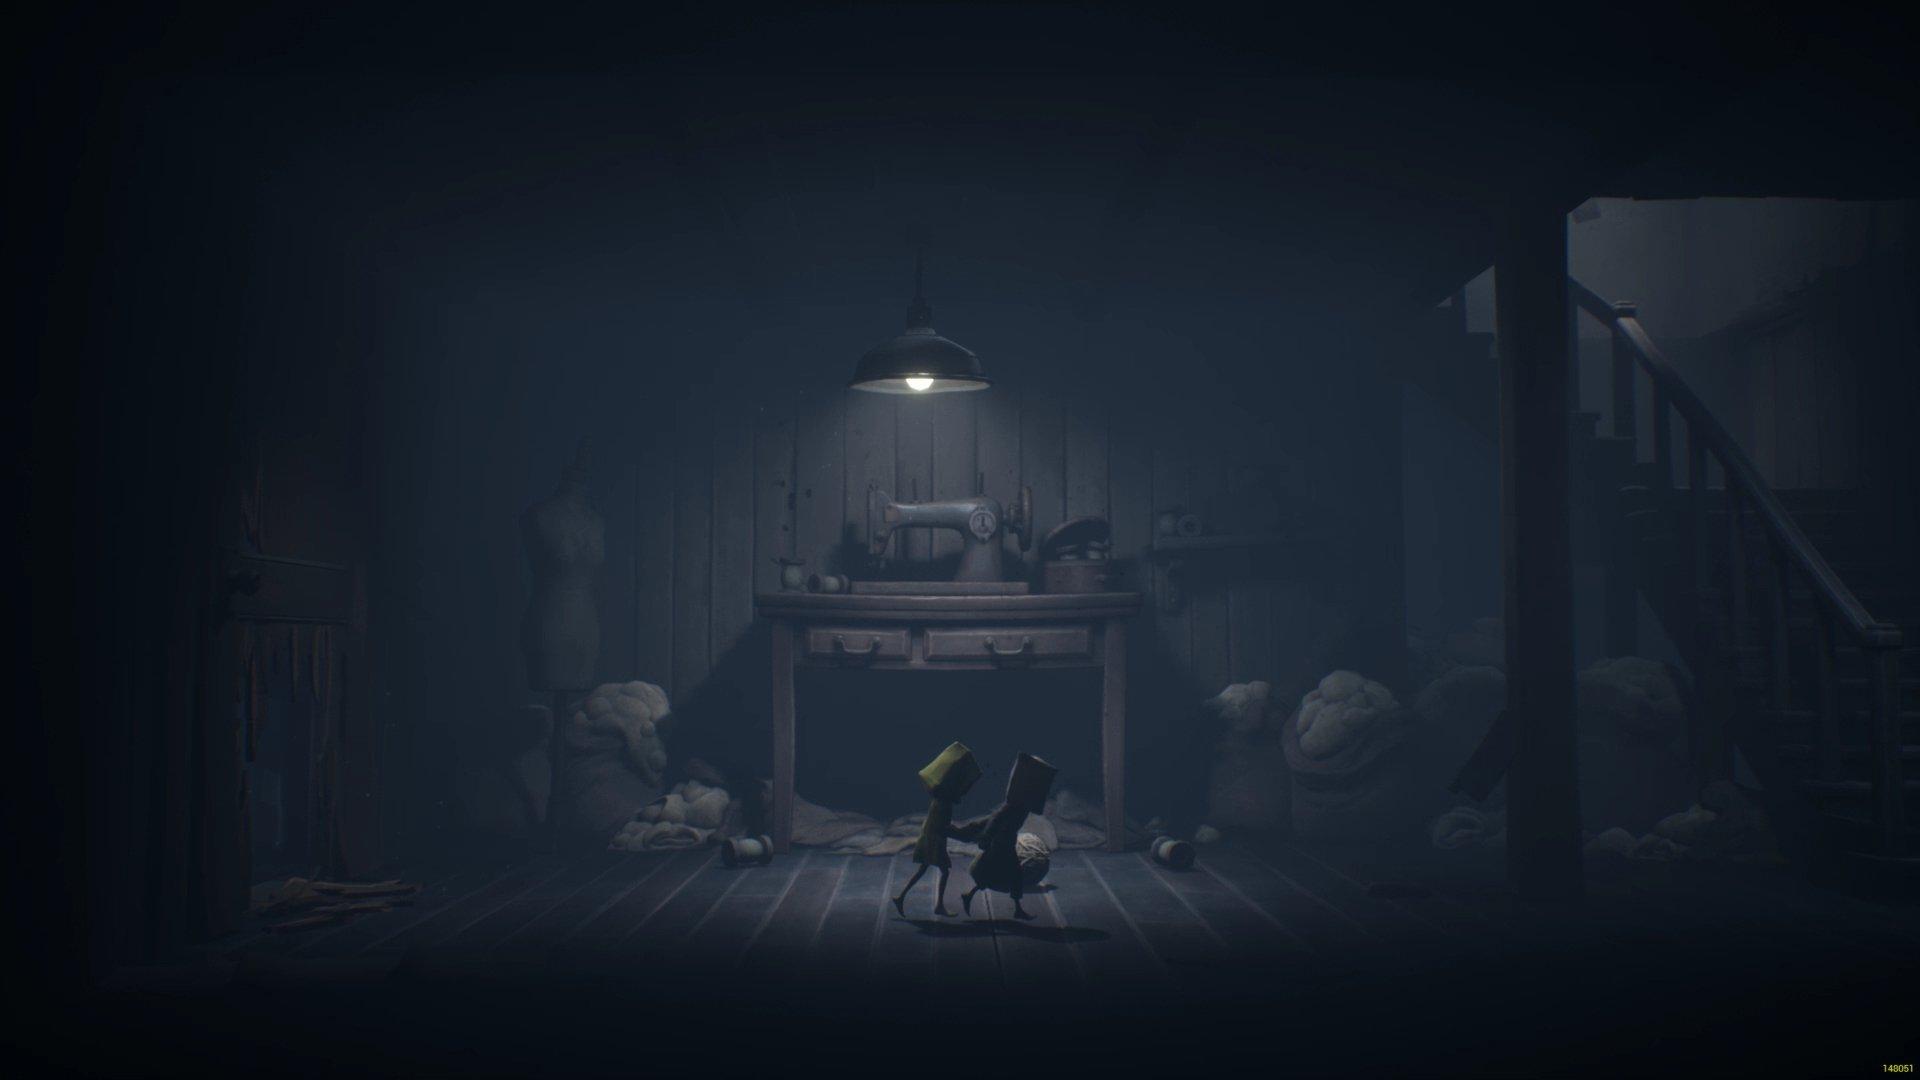 Wake Up, Mono: It's Time to Play the Little Nightmares II Demo - Xbox Wire